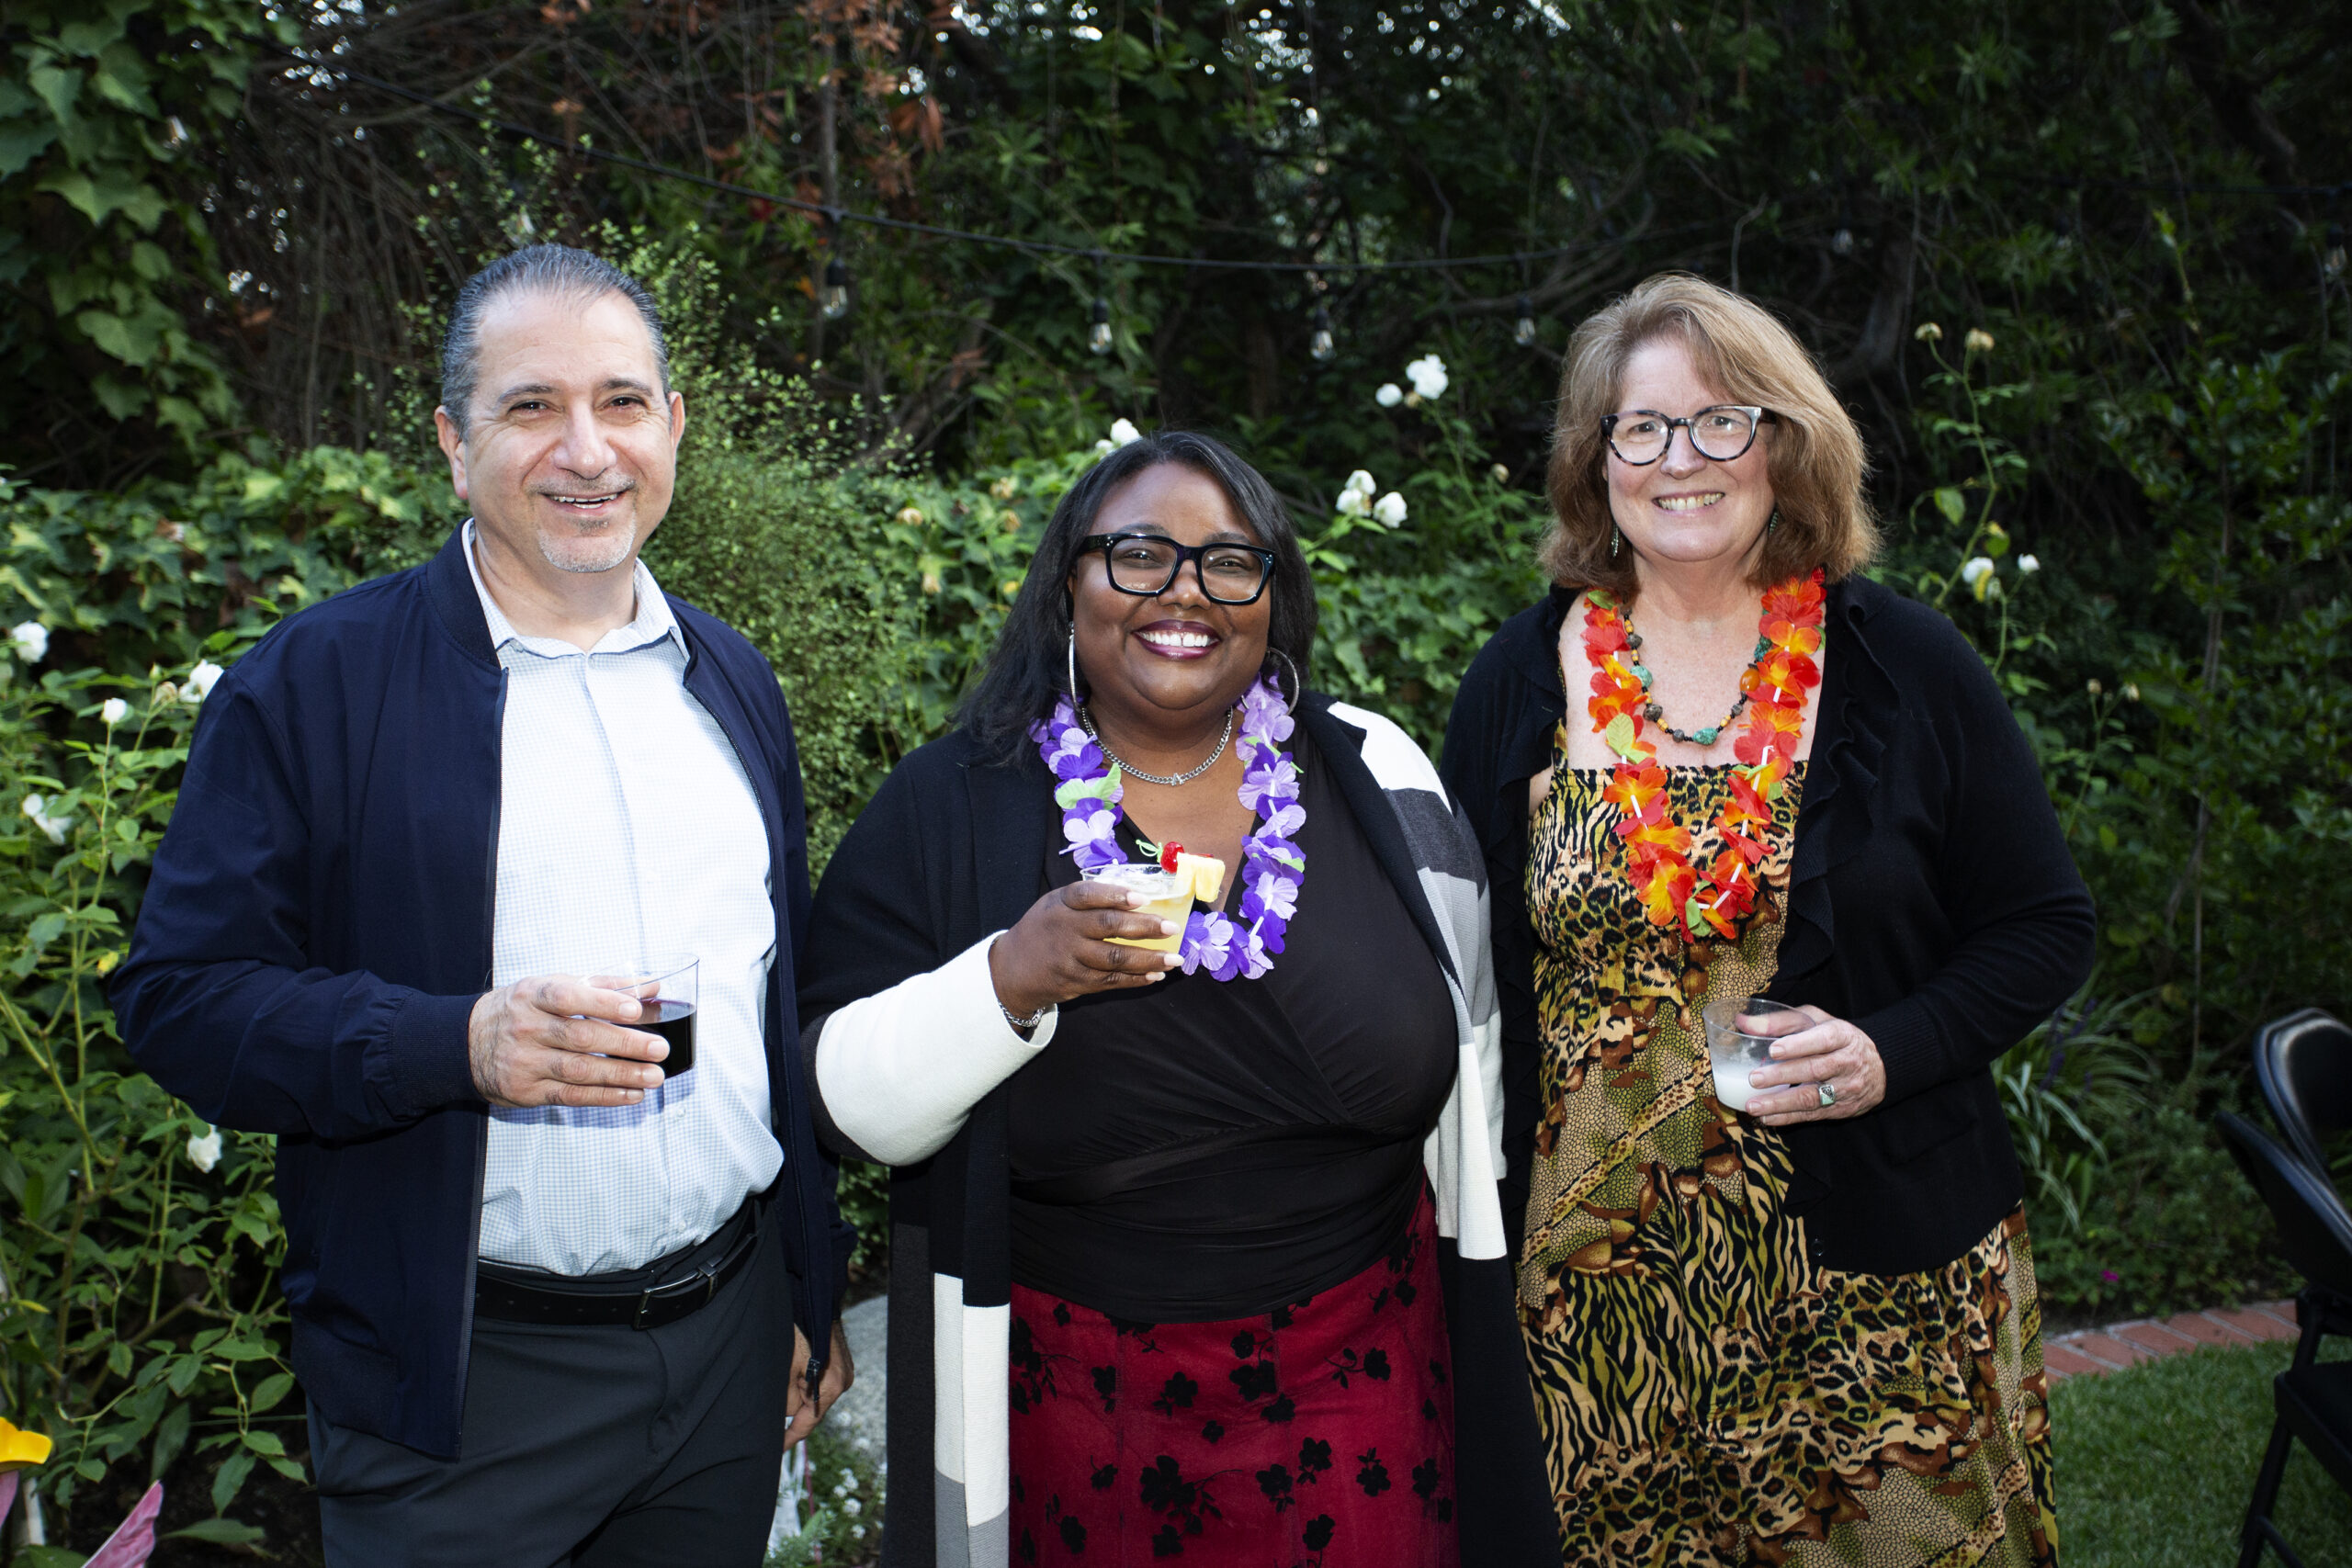 Board members and Executive Director smiling with drinks in hand